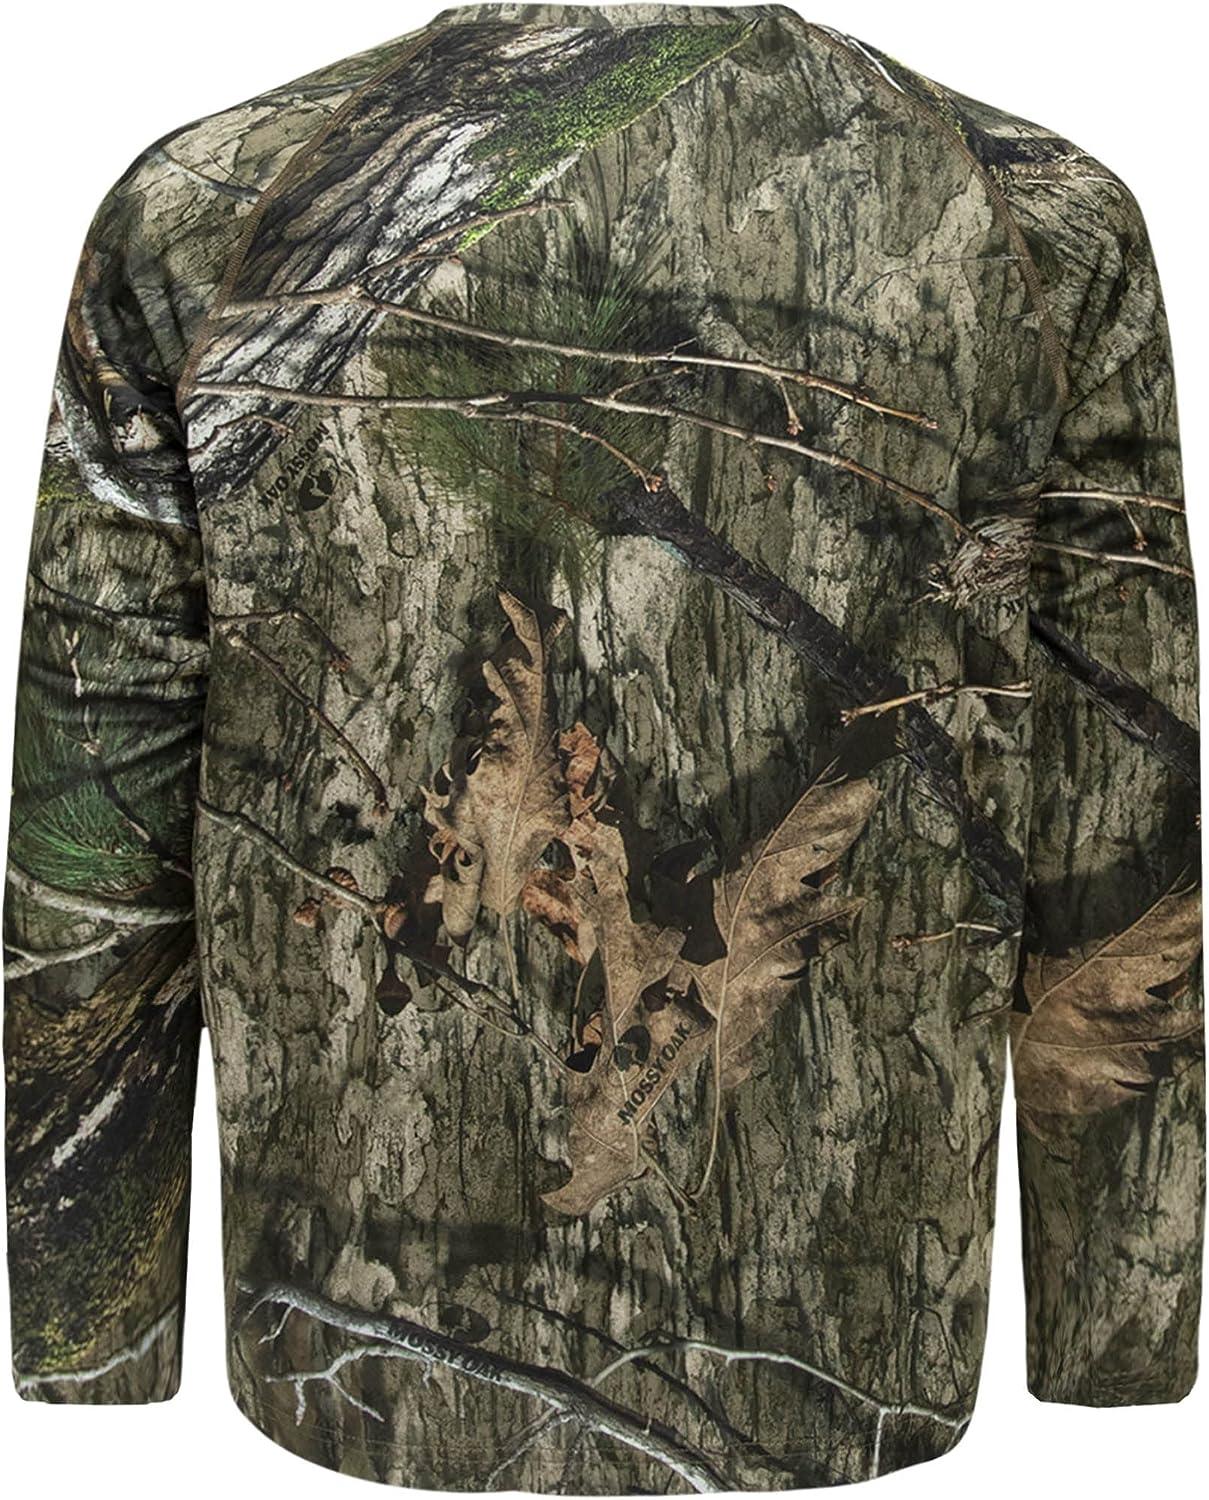 Mossy Oak Country DNA Camouflage